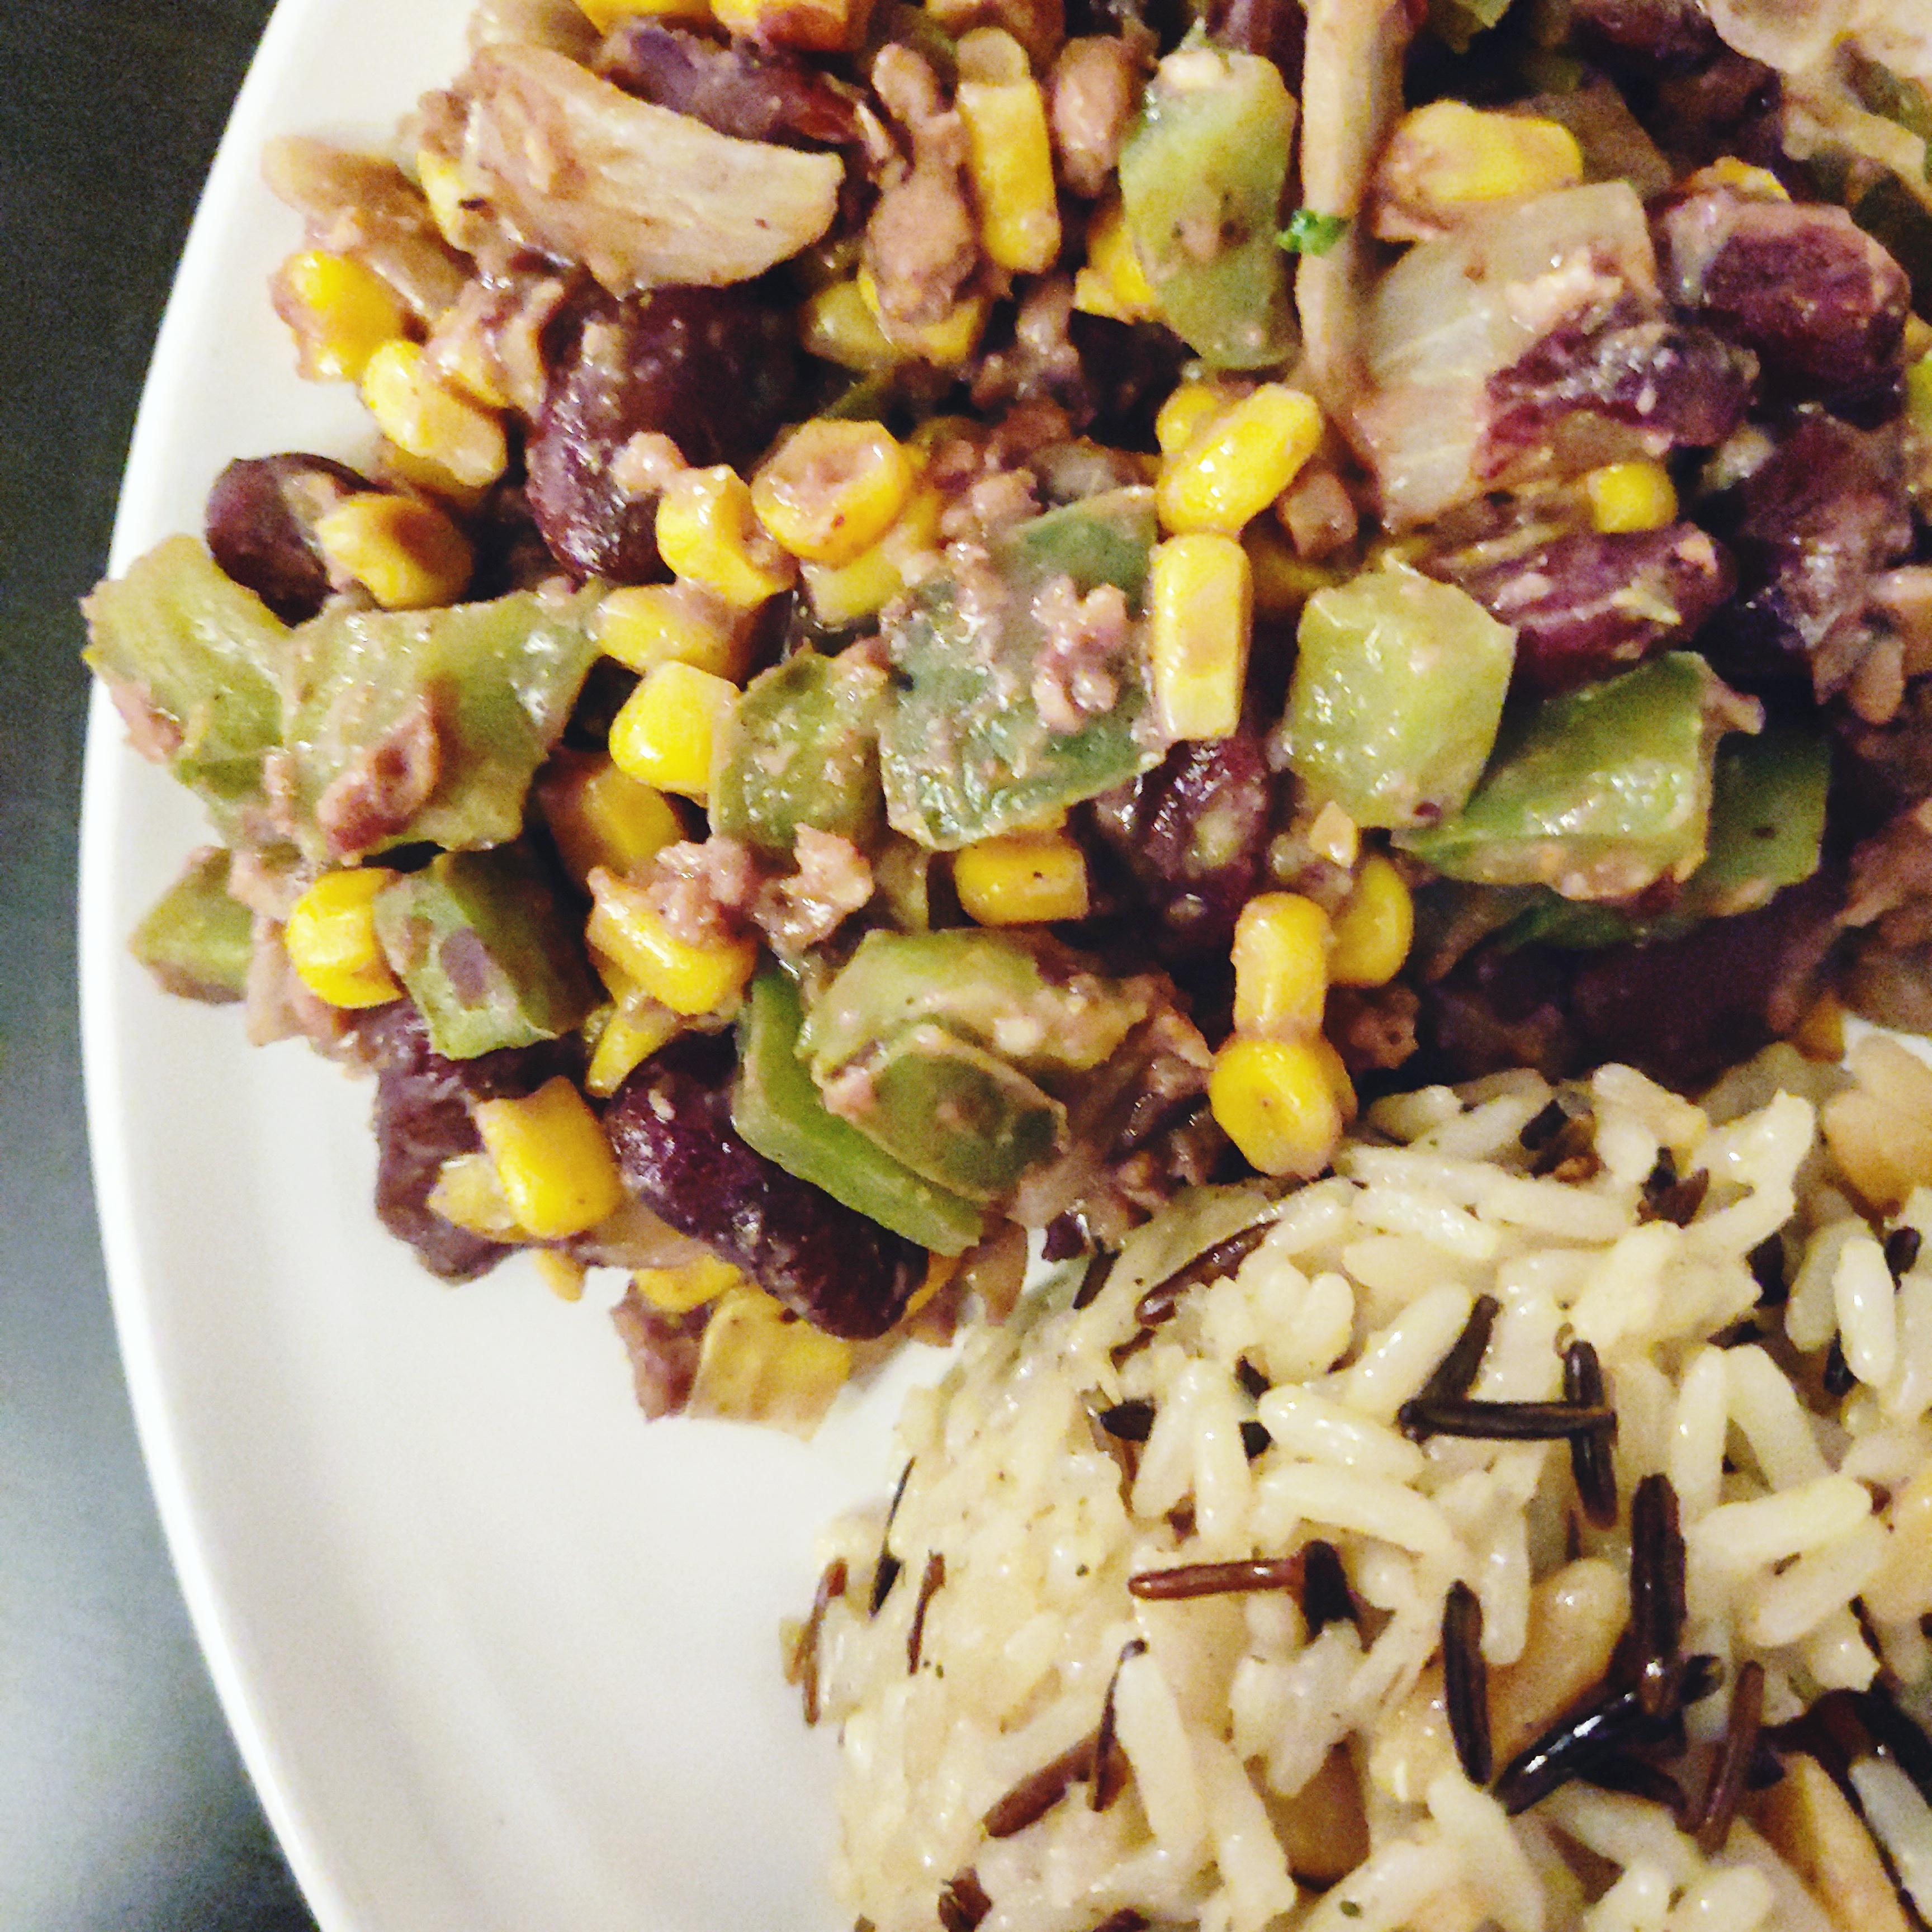 Kidney Beans and Corn